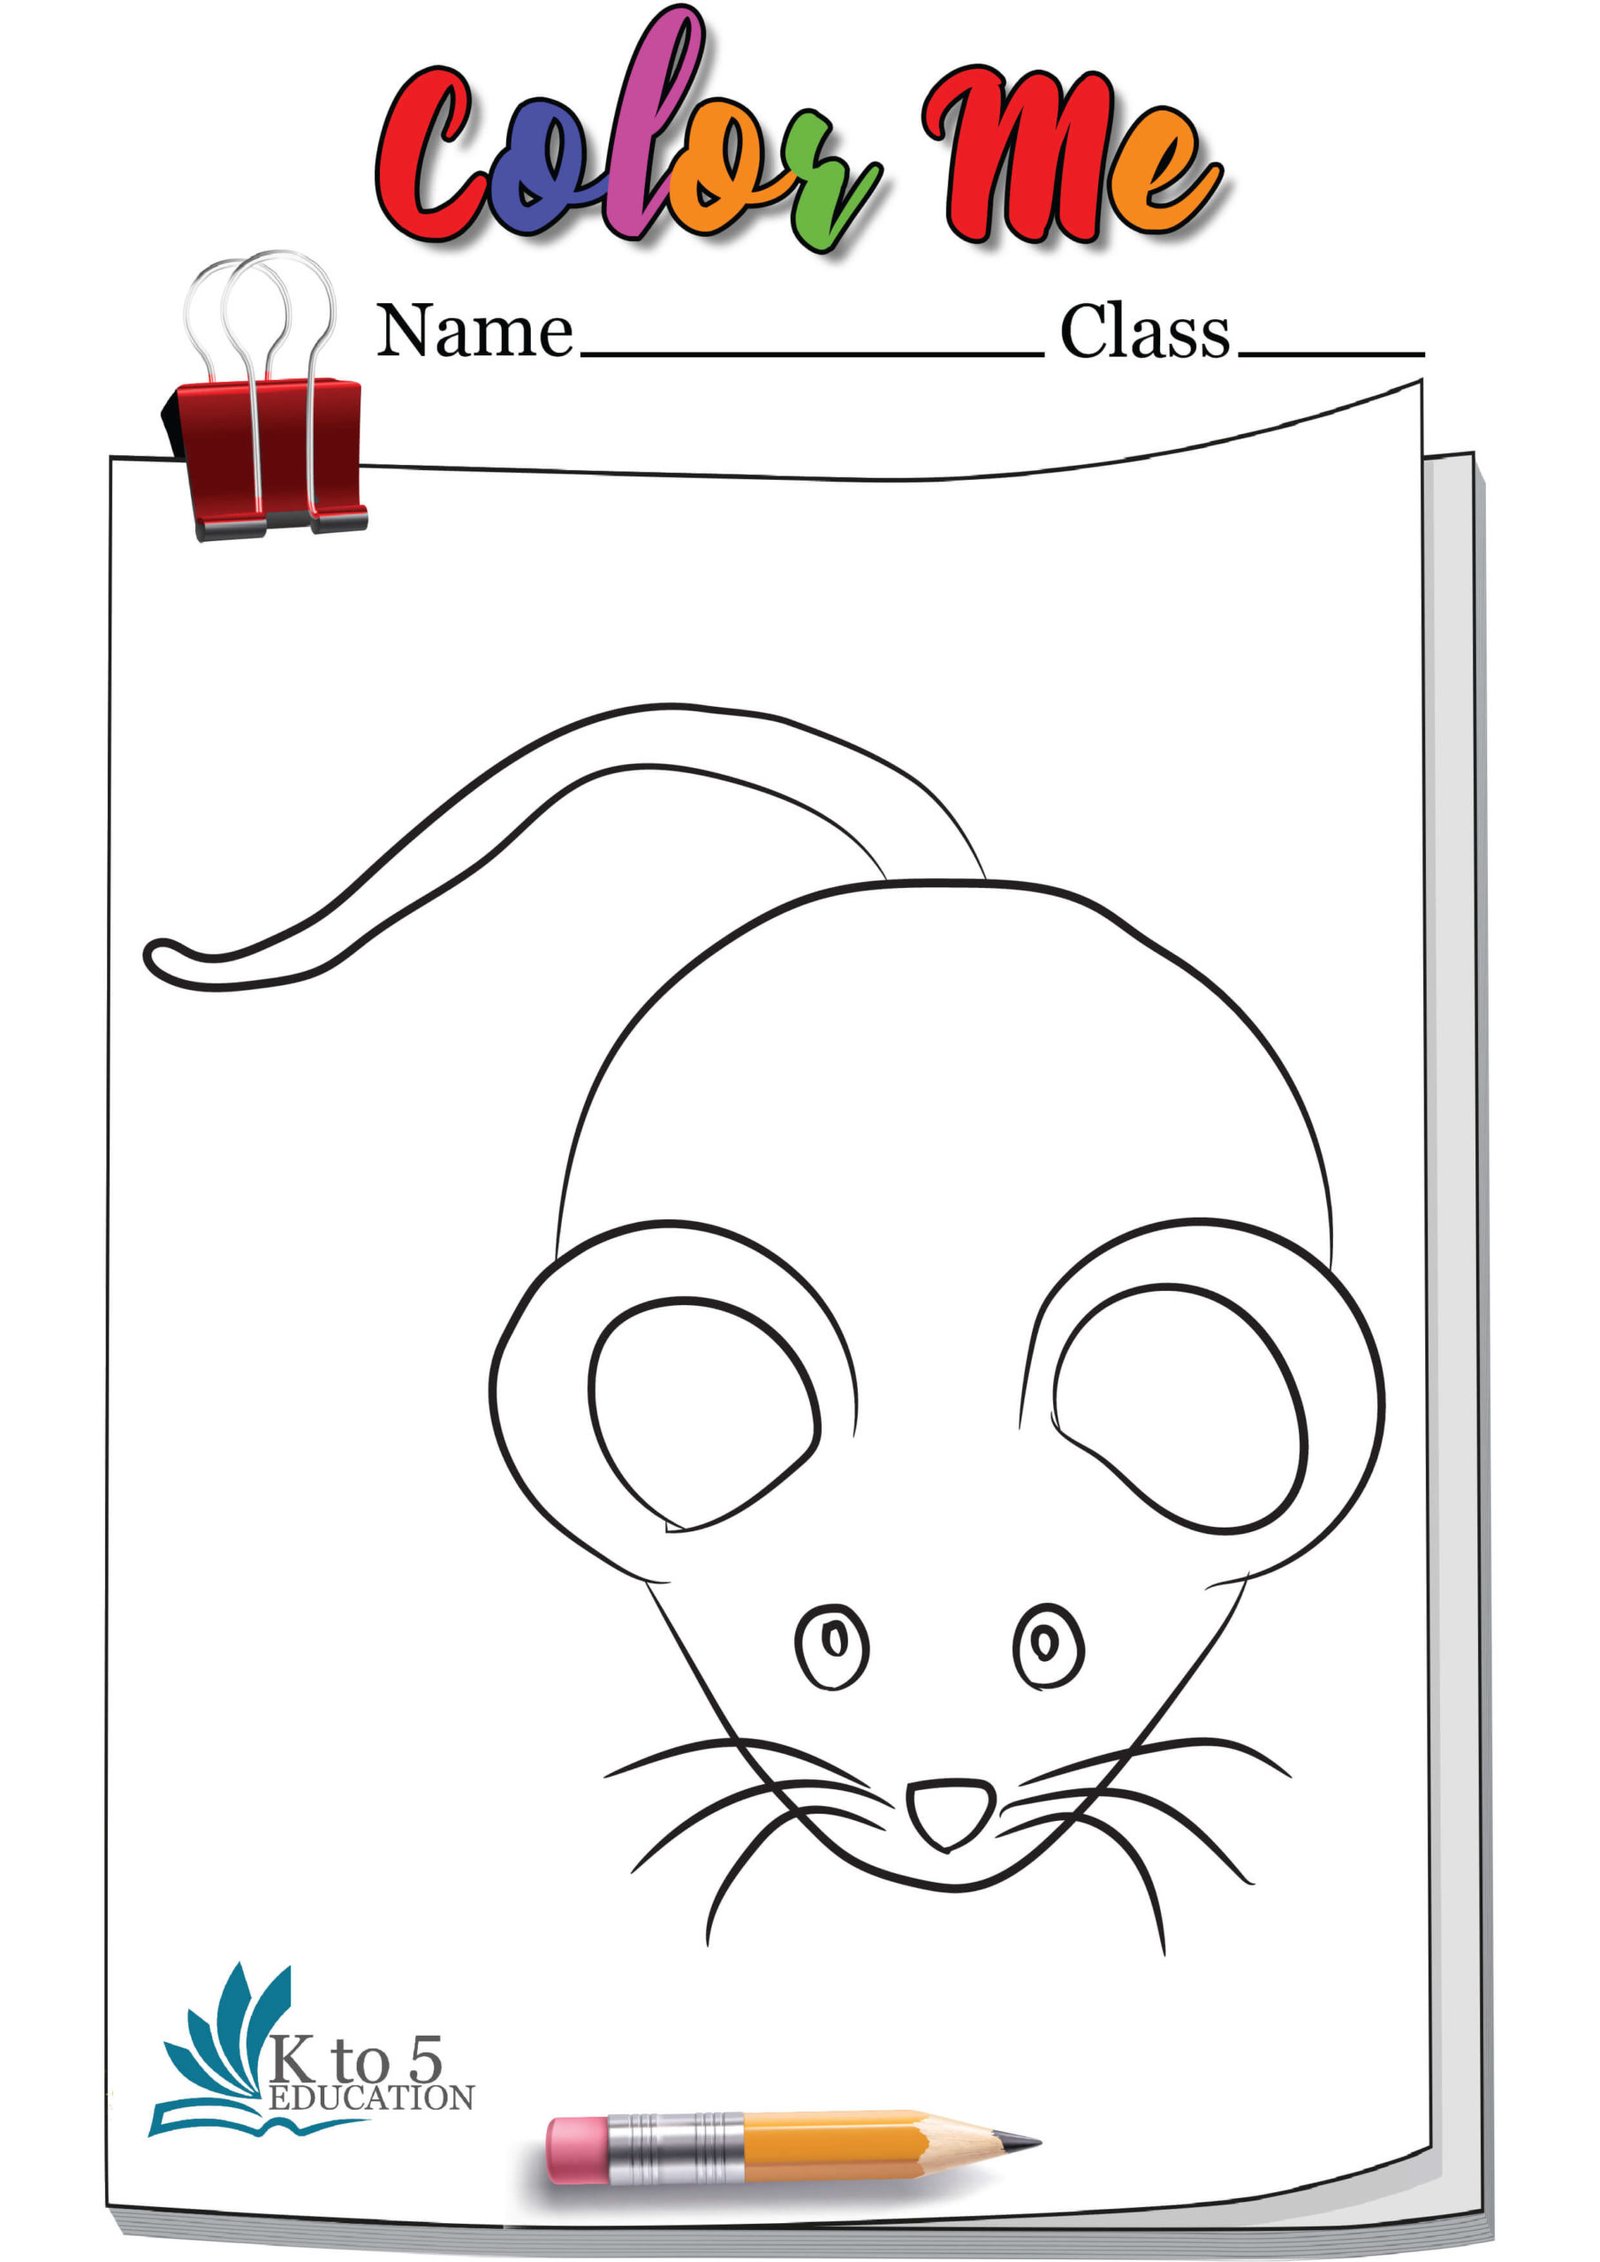 Rat Ready to Run Coloring Page Worksheet